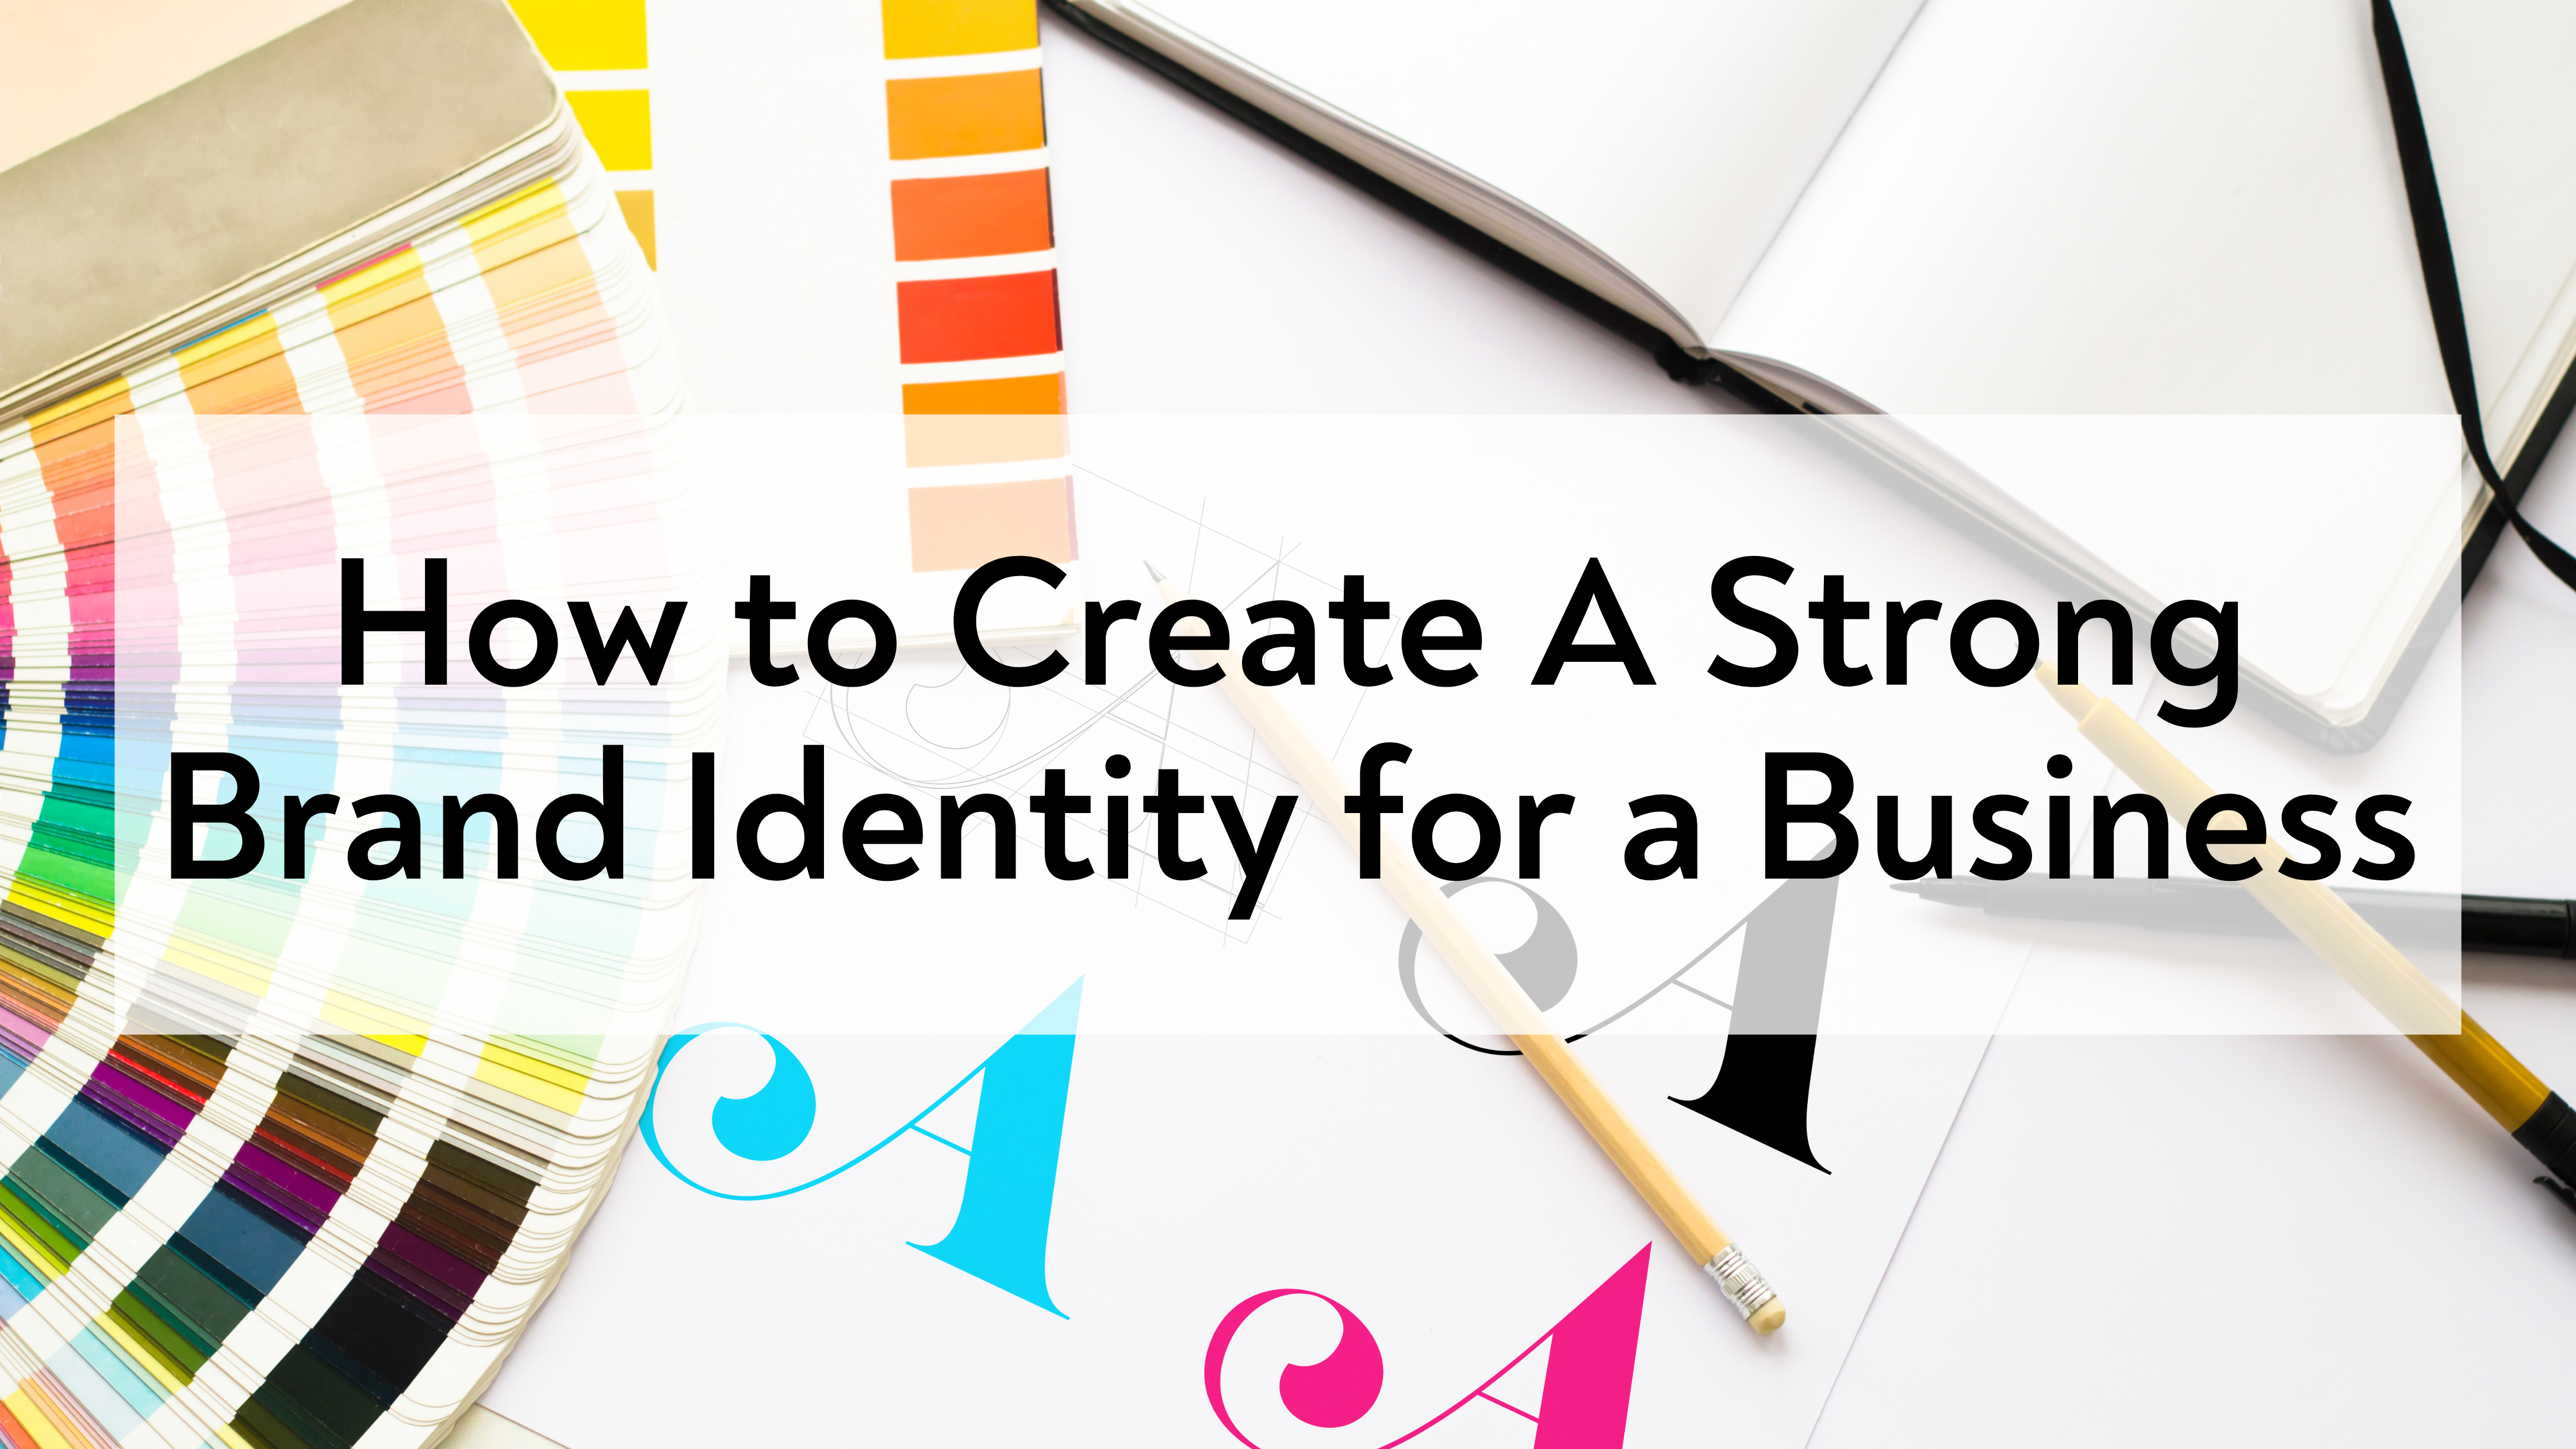 How to Create A Strong Brand Identity for a Business